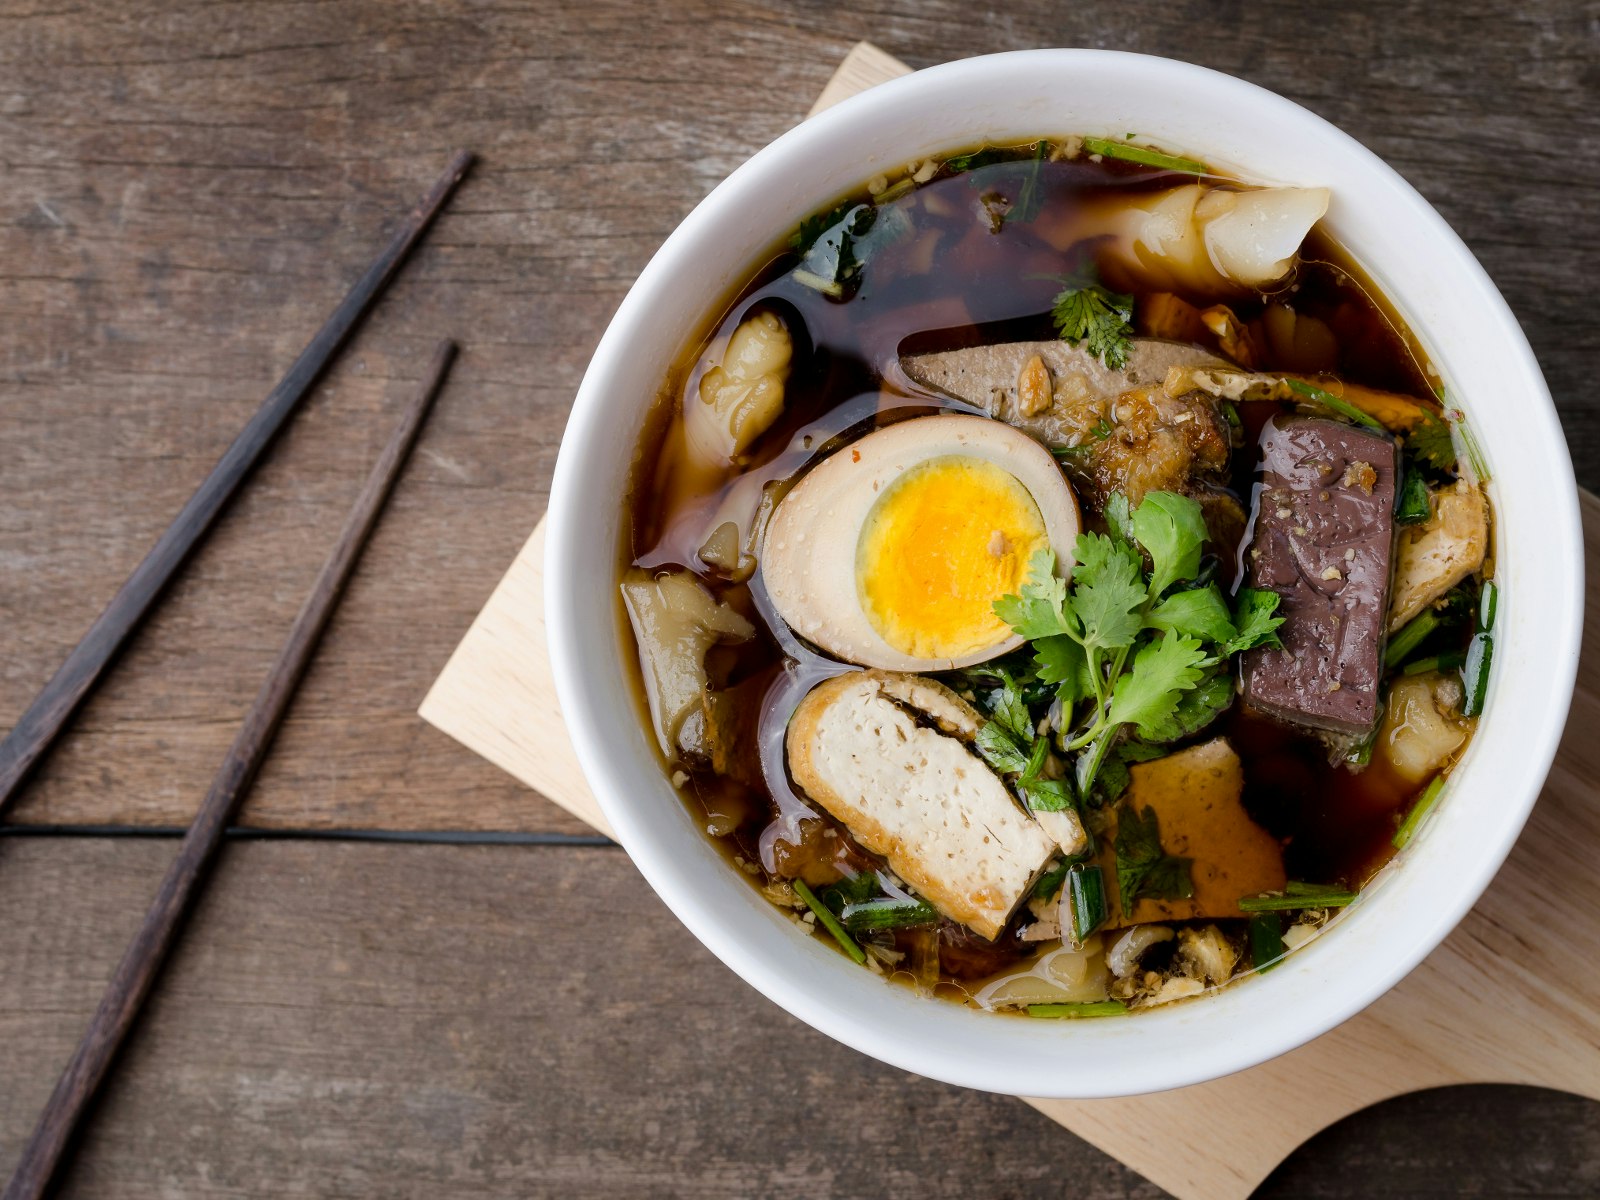 A traditional Chiuchow dish of rice-noodle sheets in a soup with pork, tofu, soy sauce and a boiled egg © Lifebrary / Shutterstock